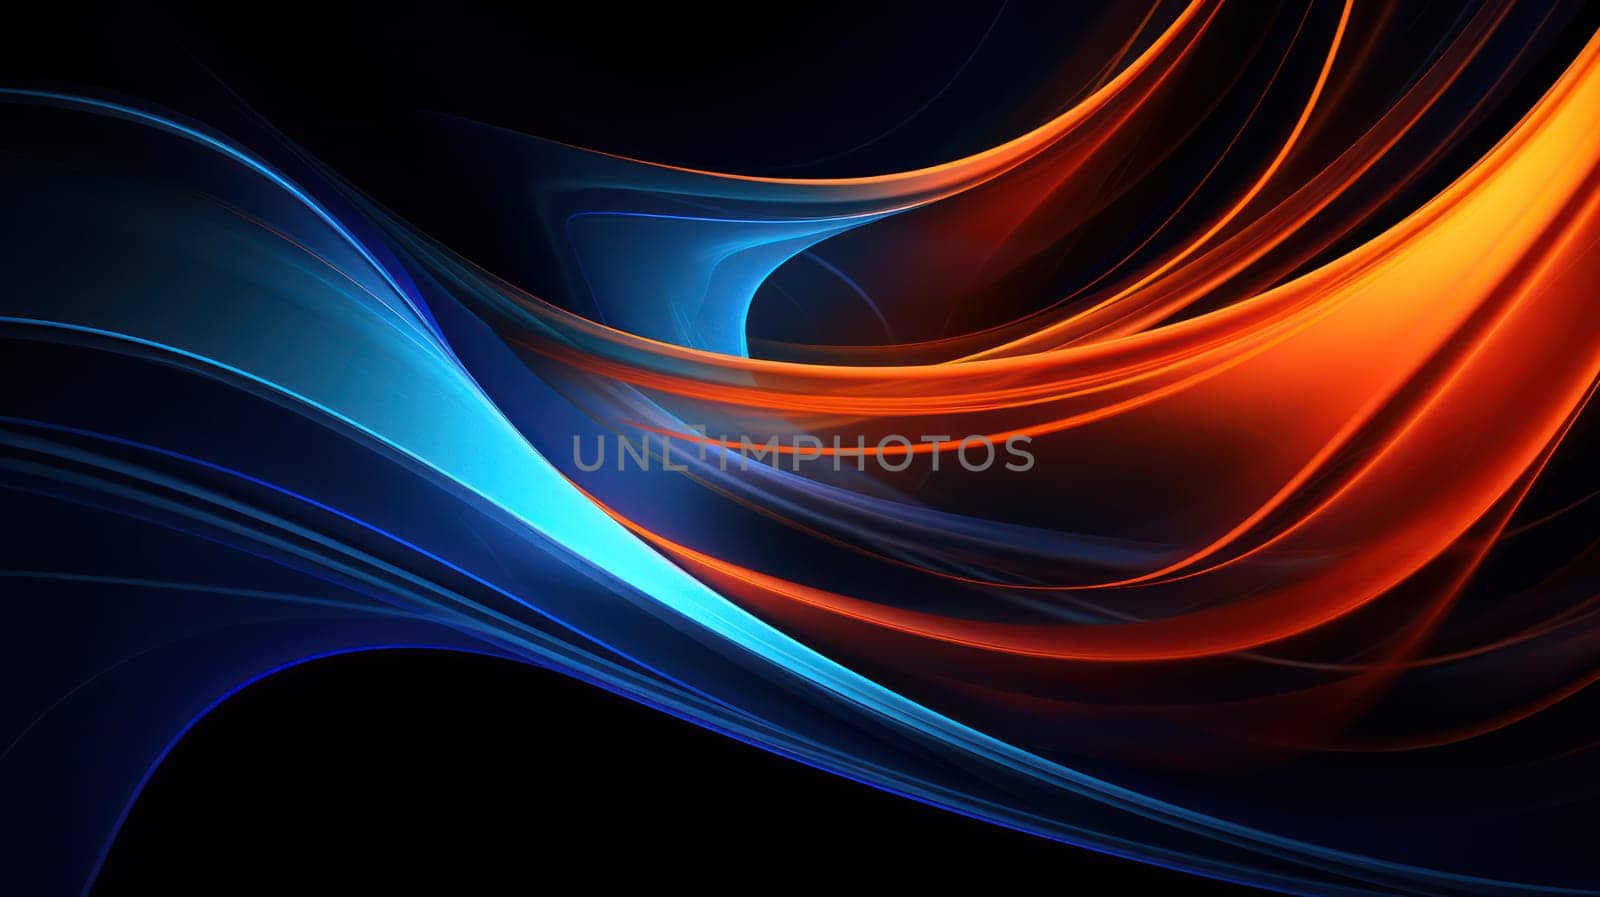 Abstract Blue Wave in Bright Light: Modern Design Illustration with Line-Style Motion Effect by Vichizh